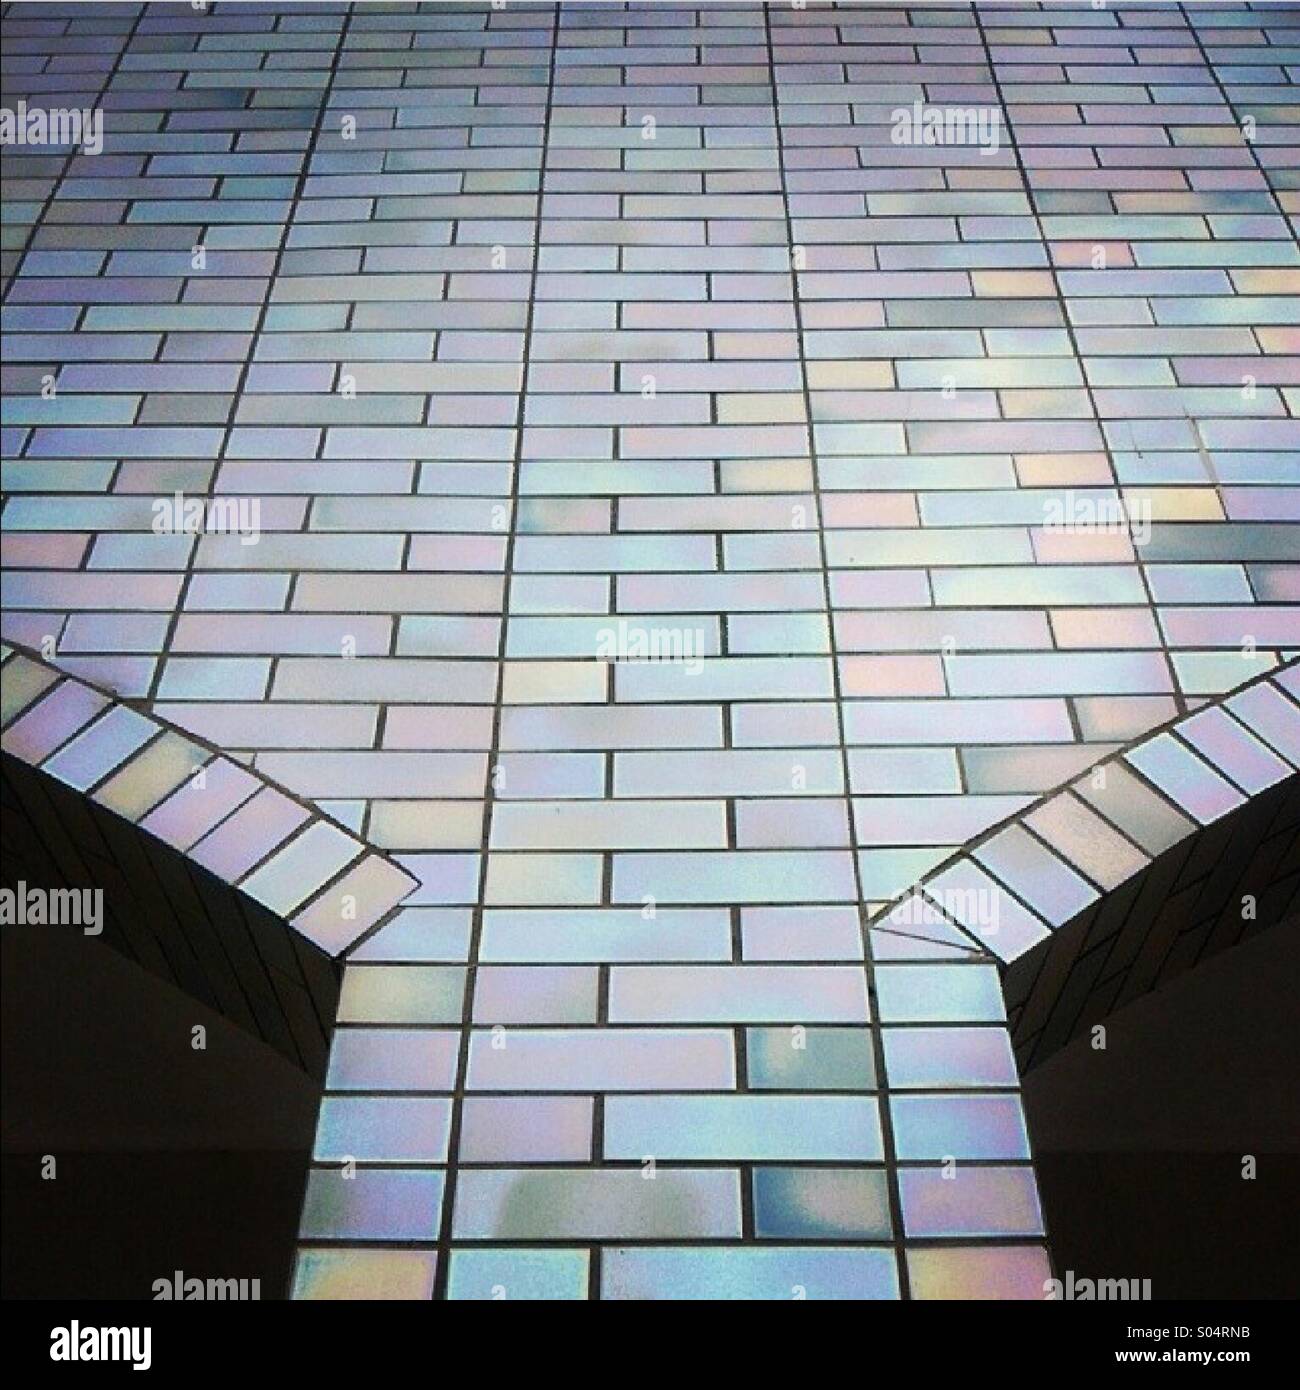 Shimmering Colours Bouncing Off As Reflection From Tiles Of A